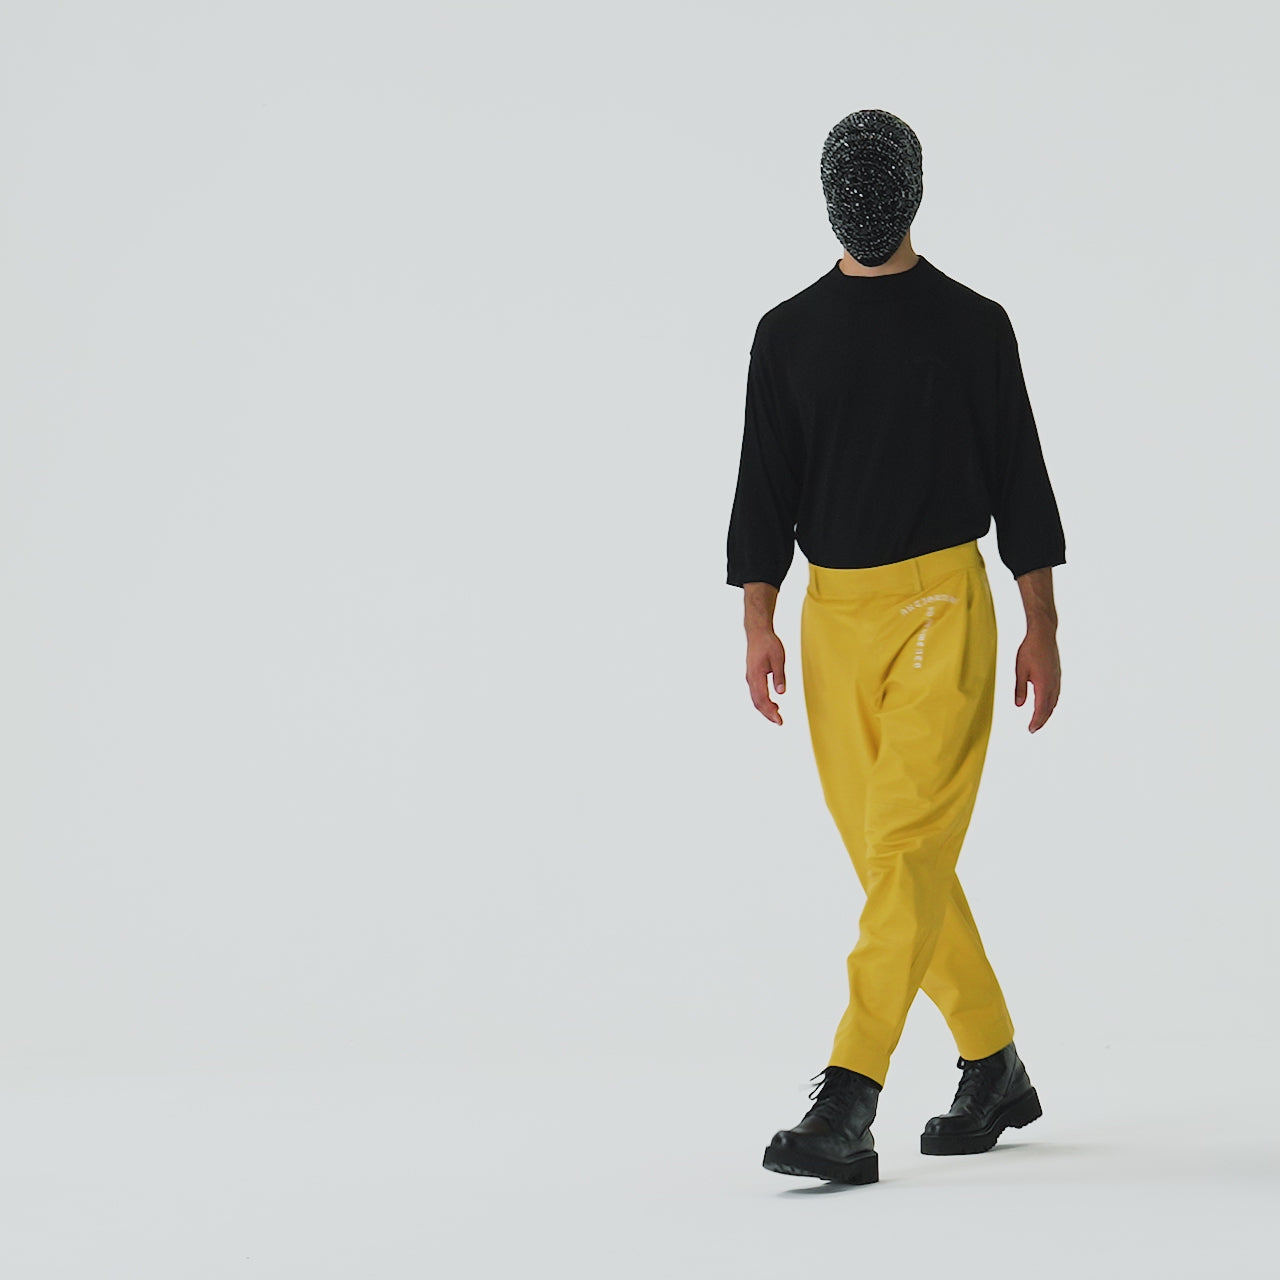 Yellow calfskin pants with lapels